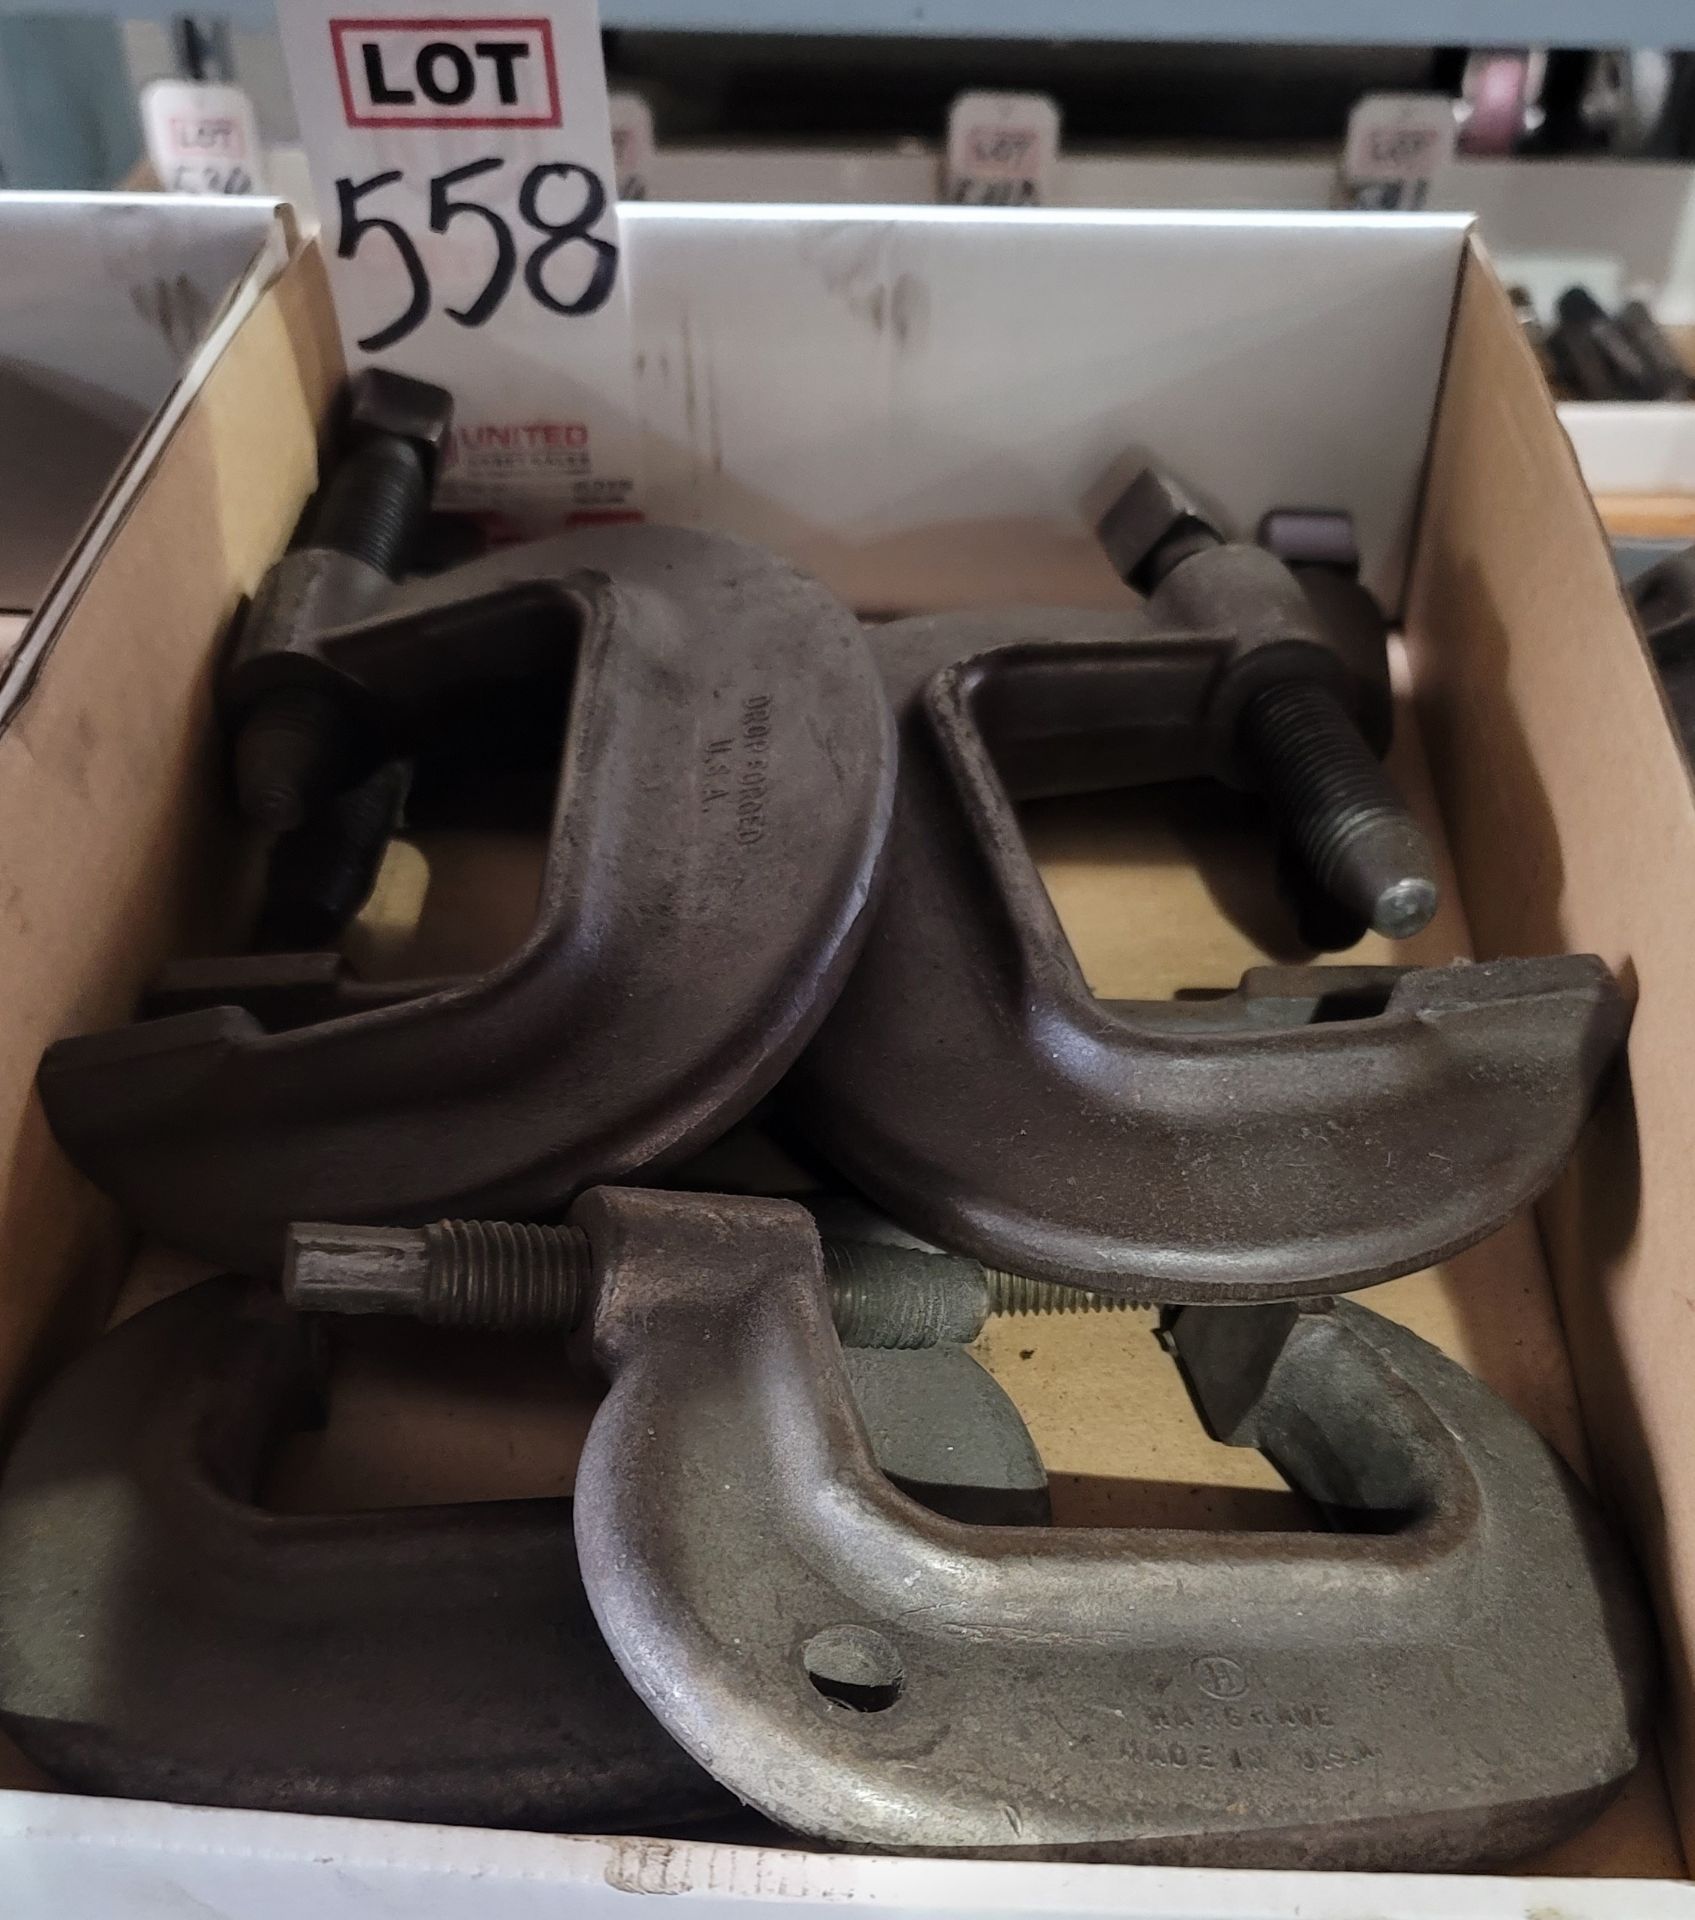 LOT - INDUSTRIAL C-CLAMPS